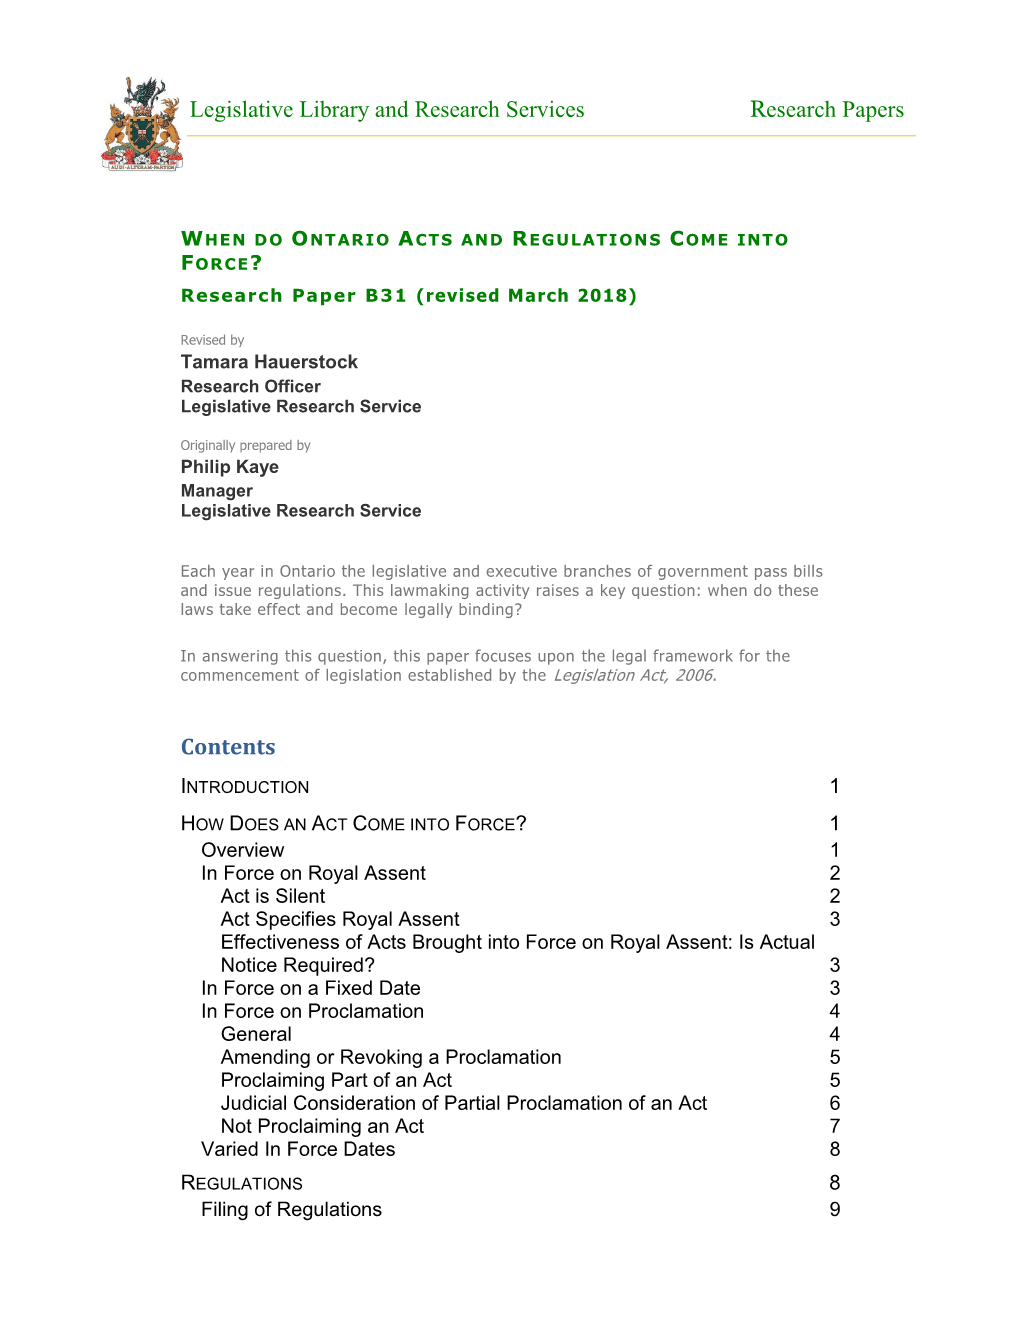 WHEN DO ONTARIO ACTS and REGULATIONS COME INTO FORCE? Research Paper B31 (Revised March 2018)